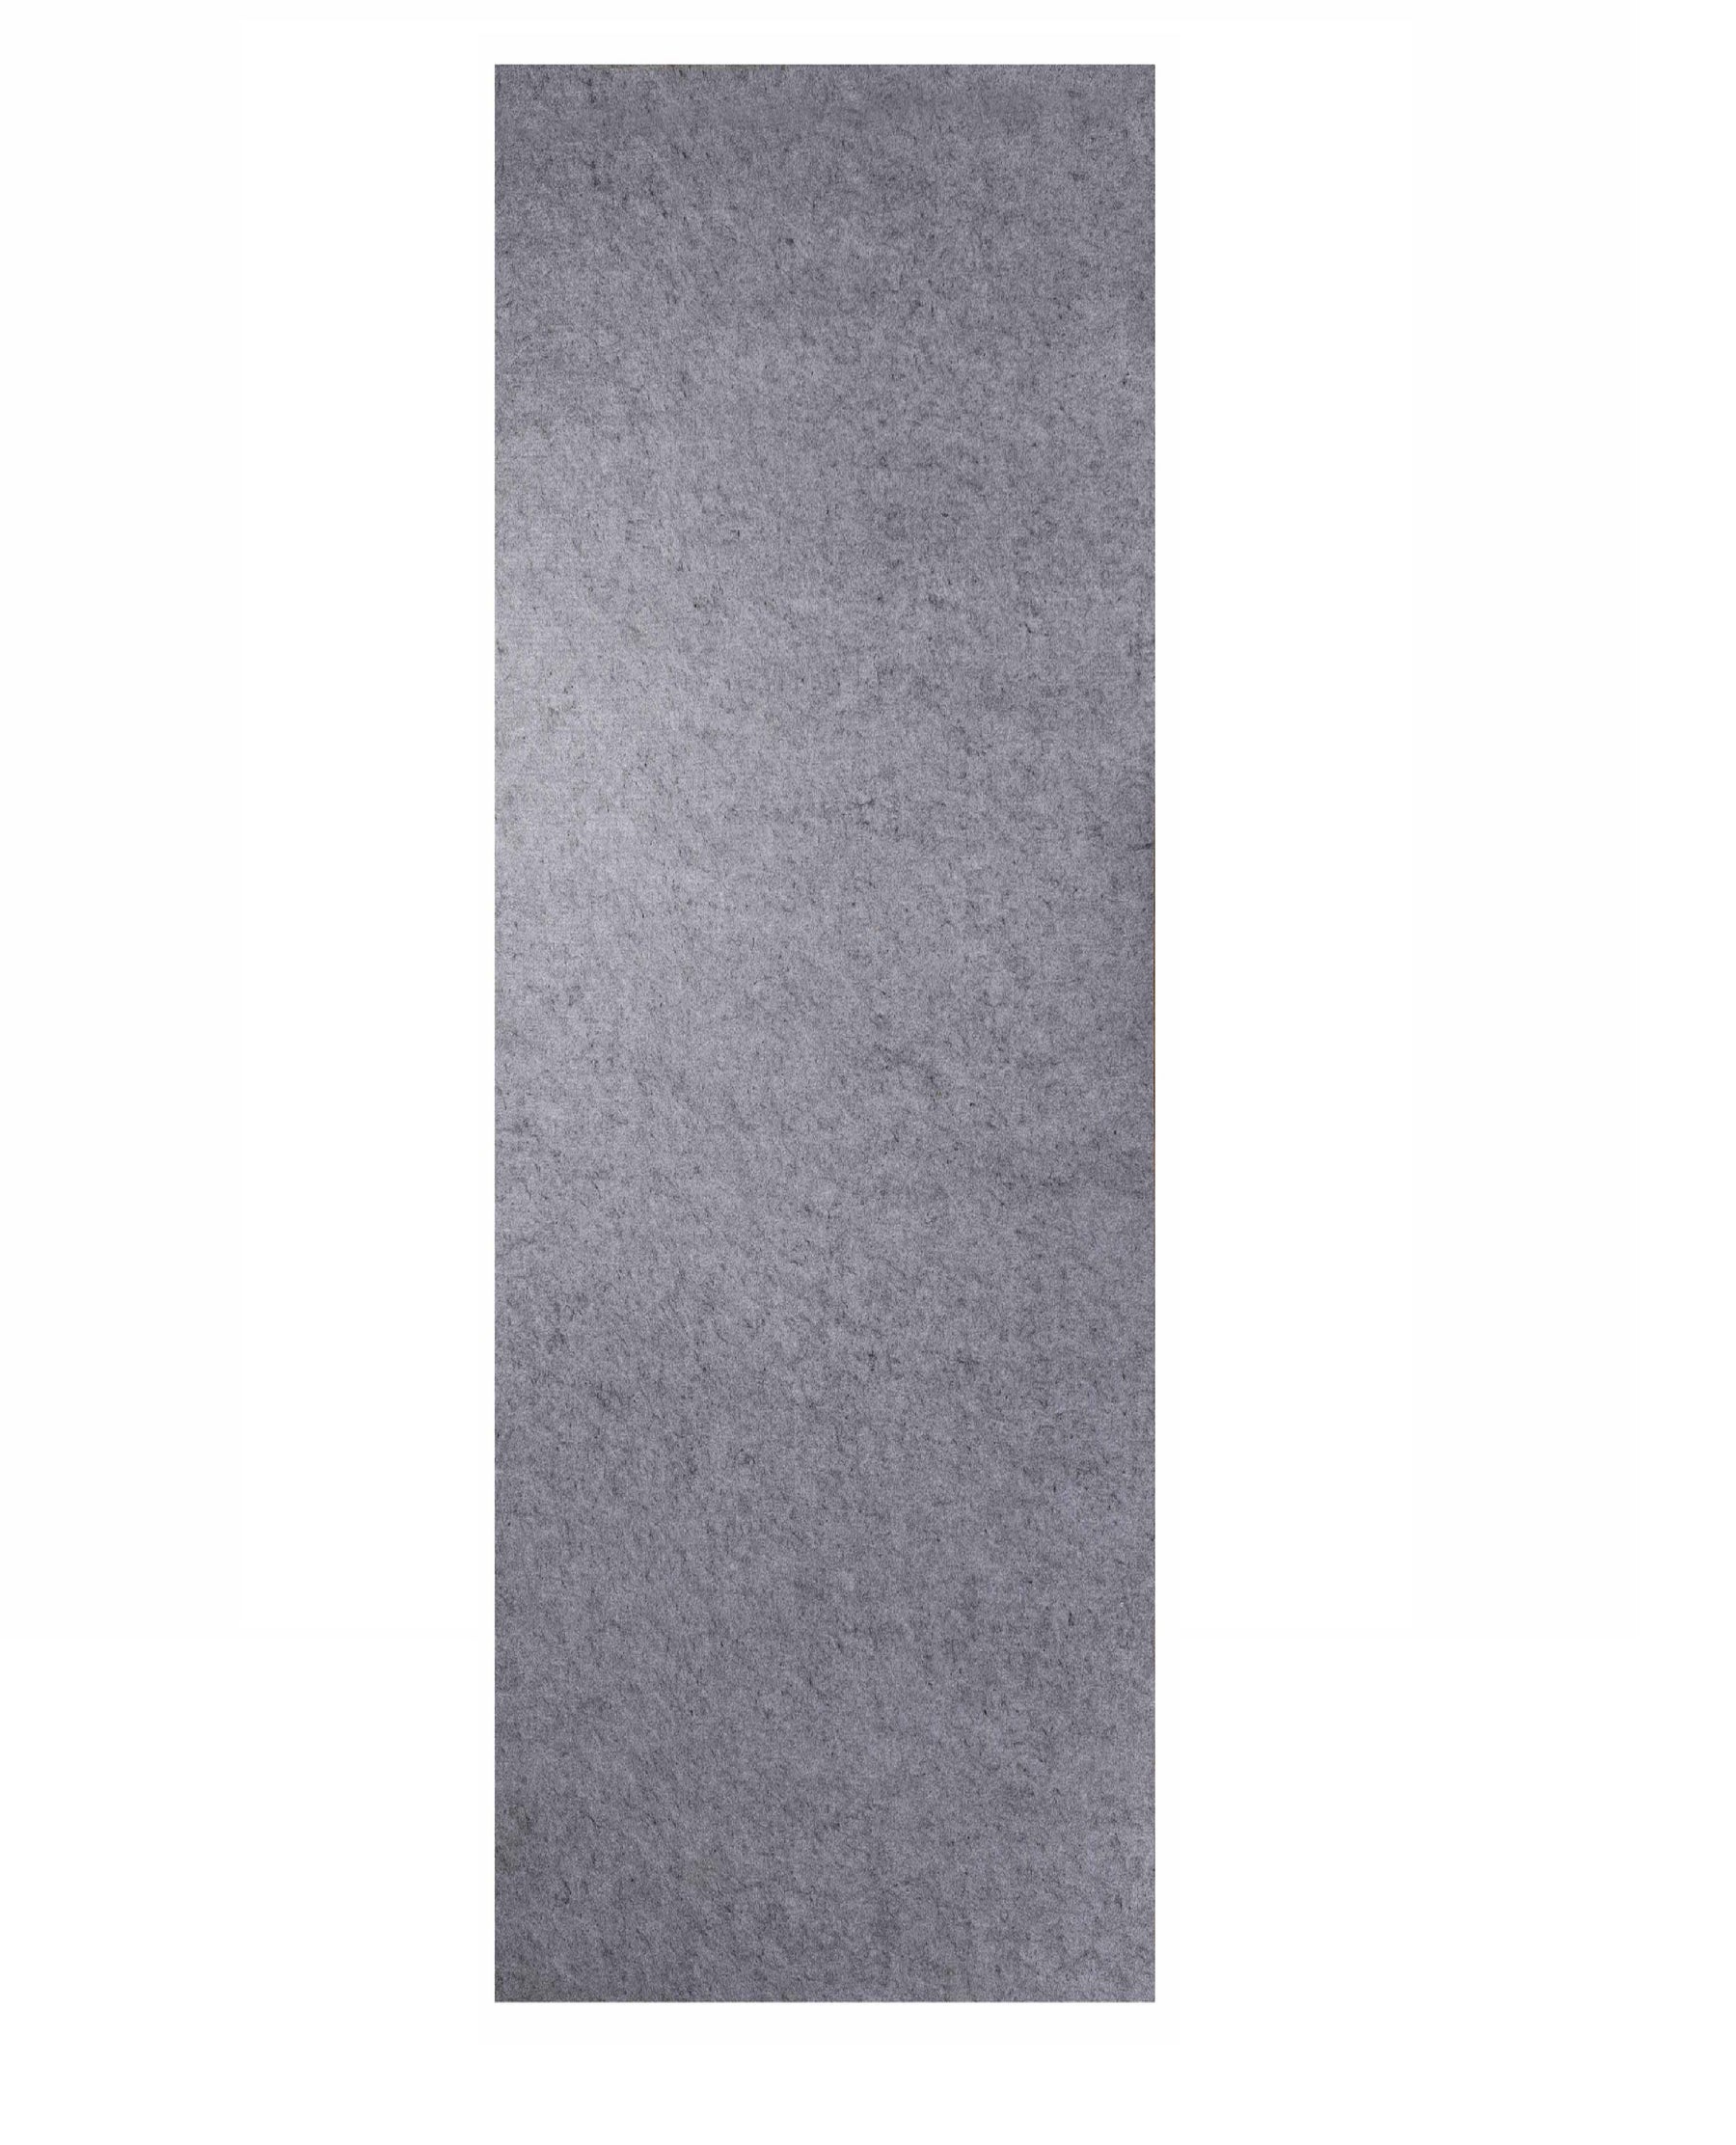 Protector V Gray Synthetic Fabric Rug Pad - Rooms To Go